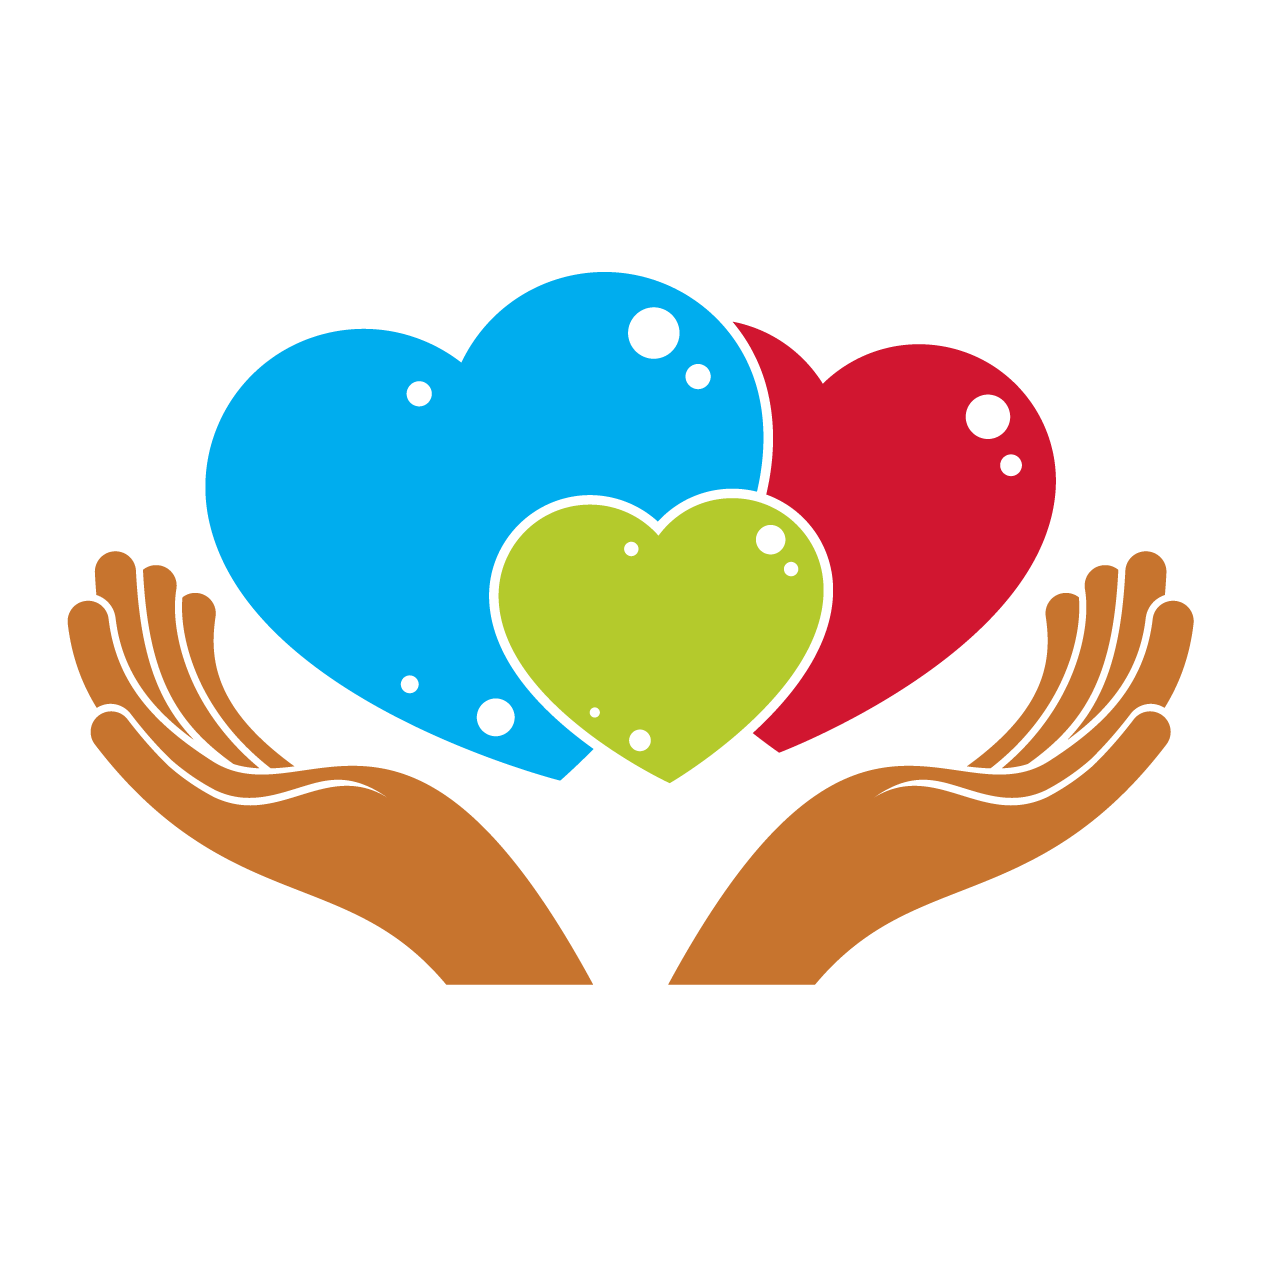 Happy family logo icon created with three colorful hearts different sizes care hands tender loving relationship father mother child together as one system relations